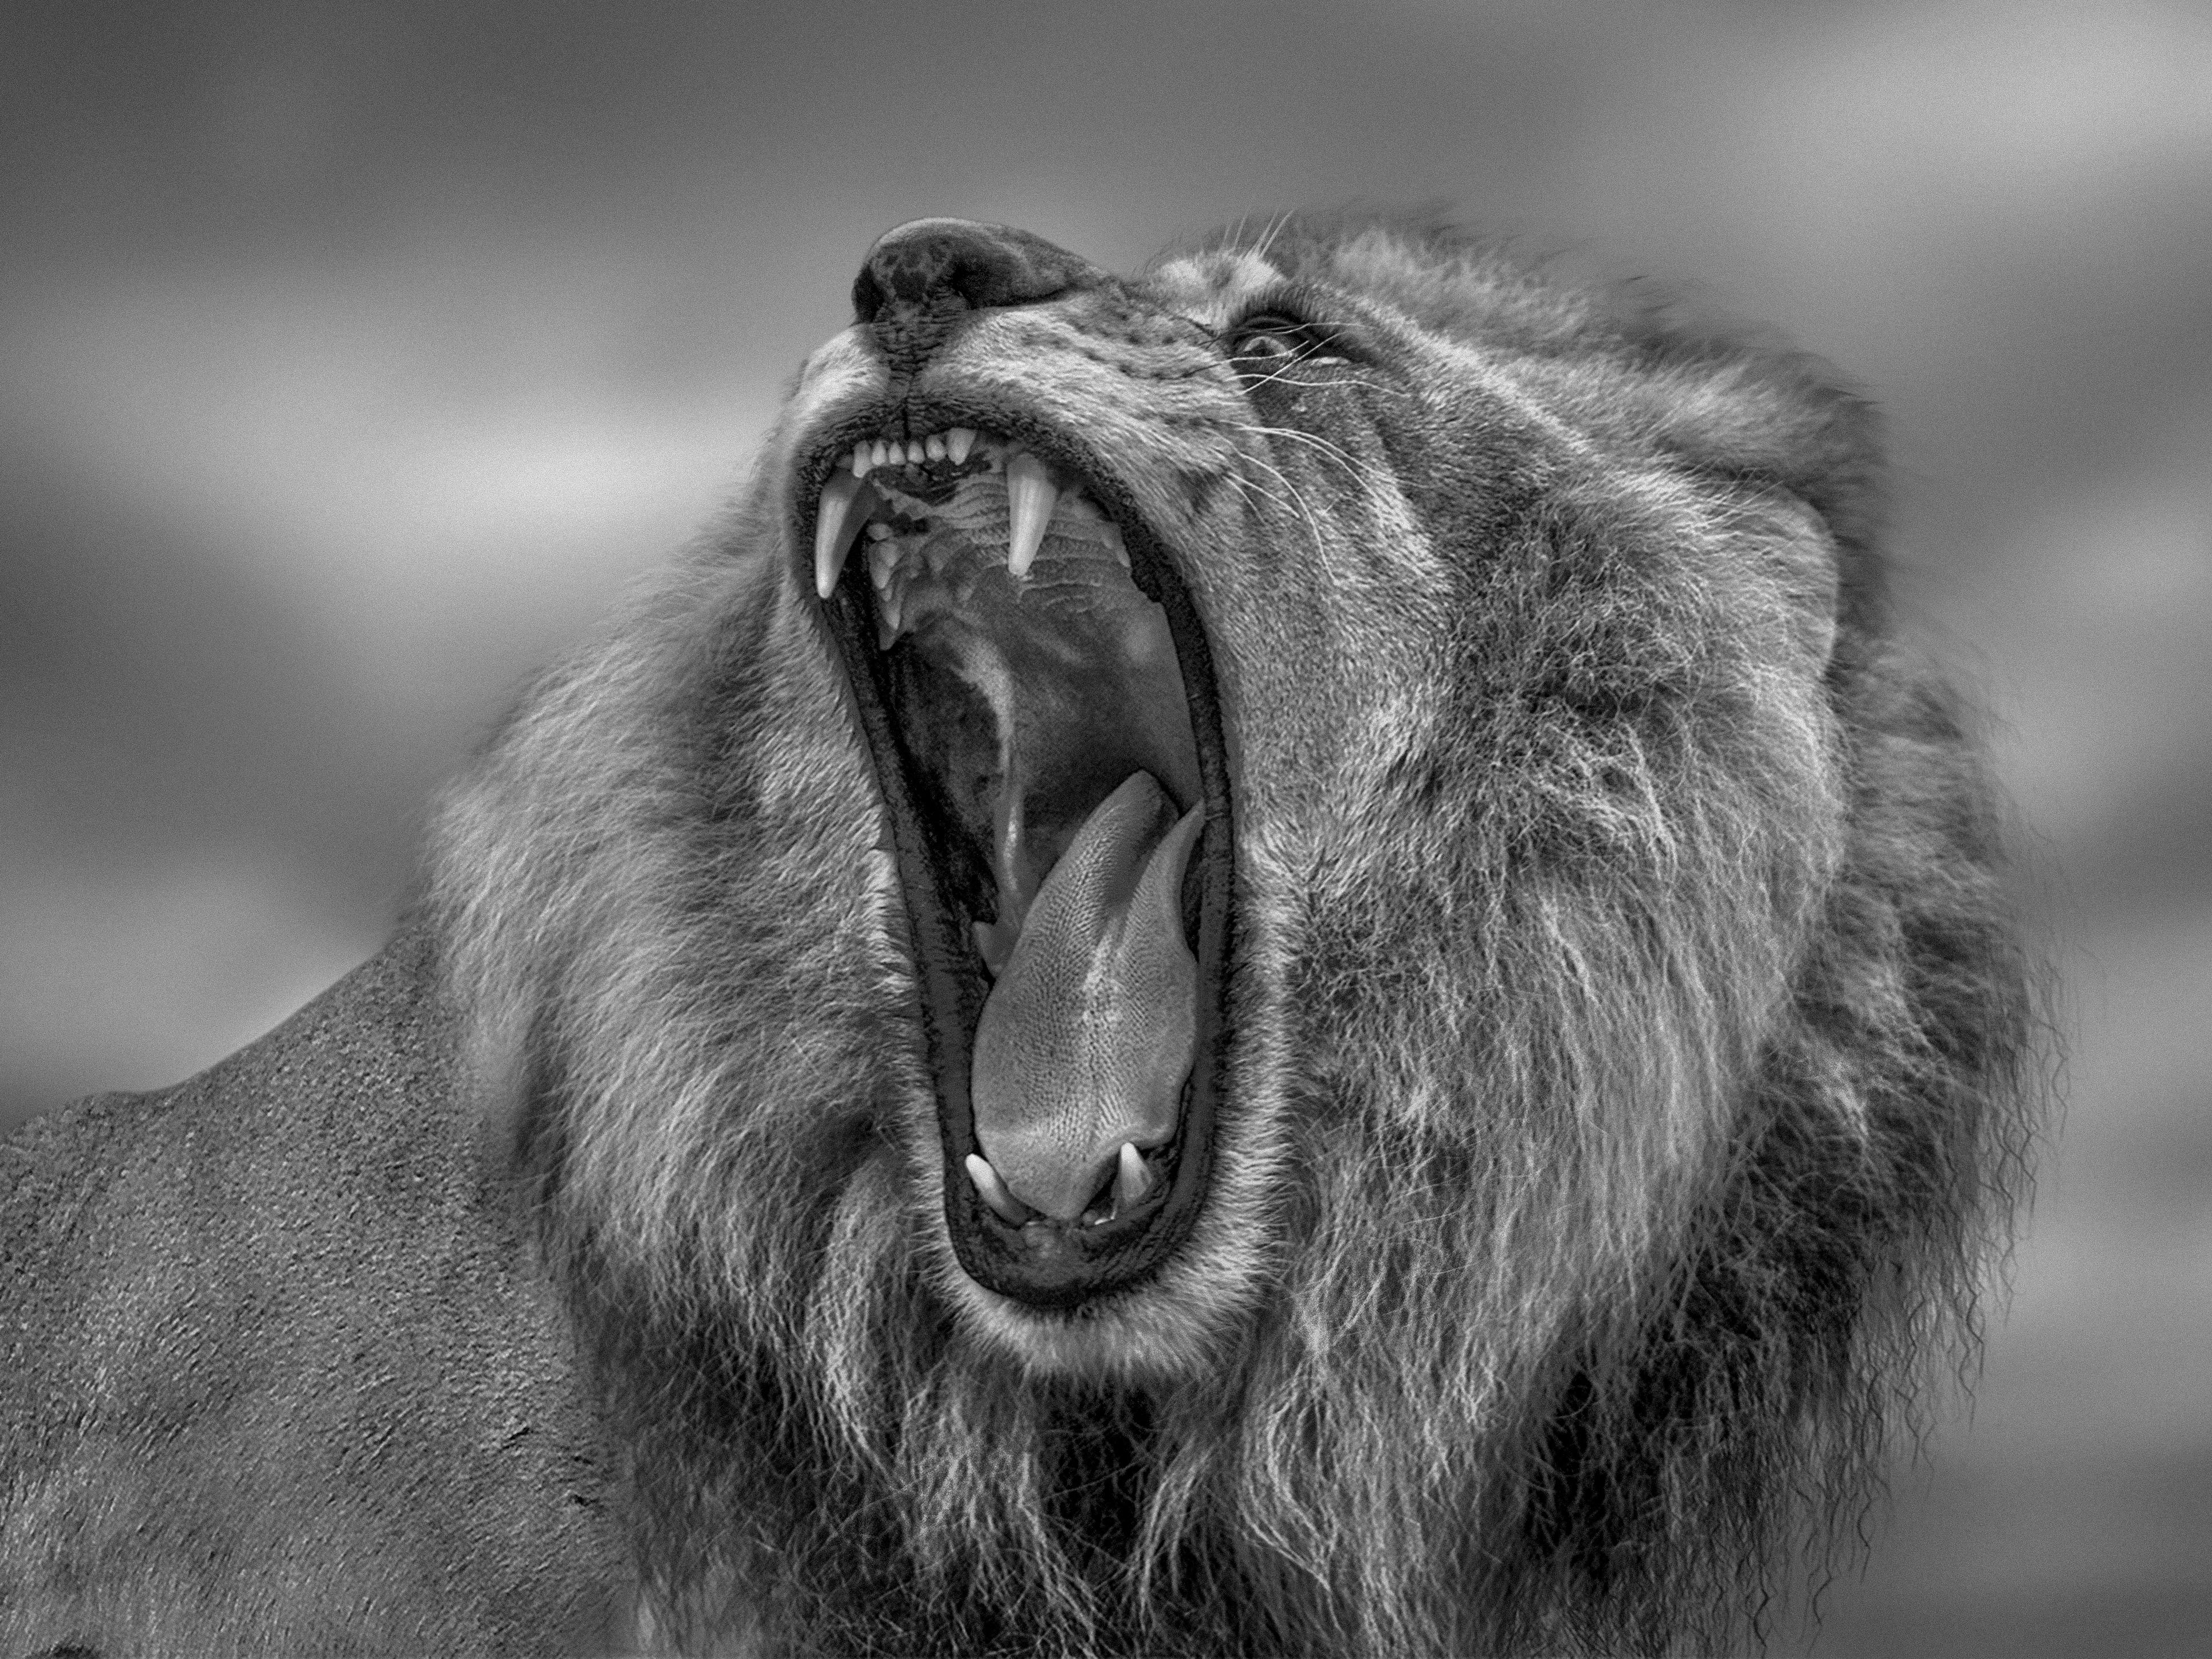 Shane Russeck Black and White Photograph - "Roar" - 40x60 Black & White Lion Photography , Africa, Lion Photograph Unsinged